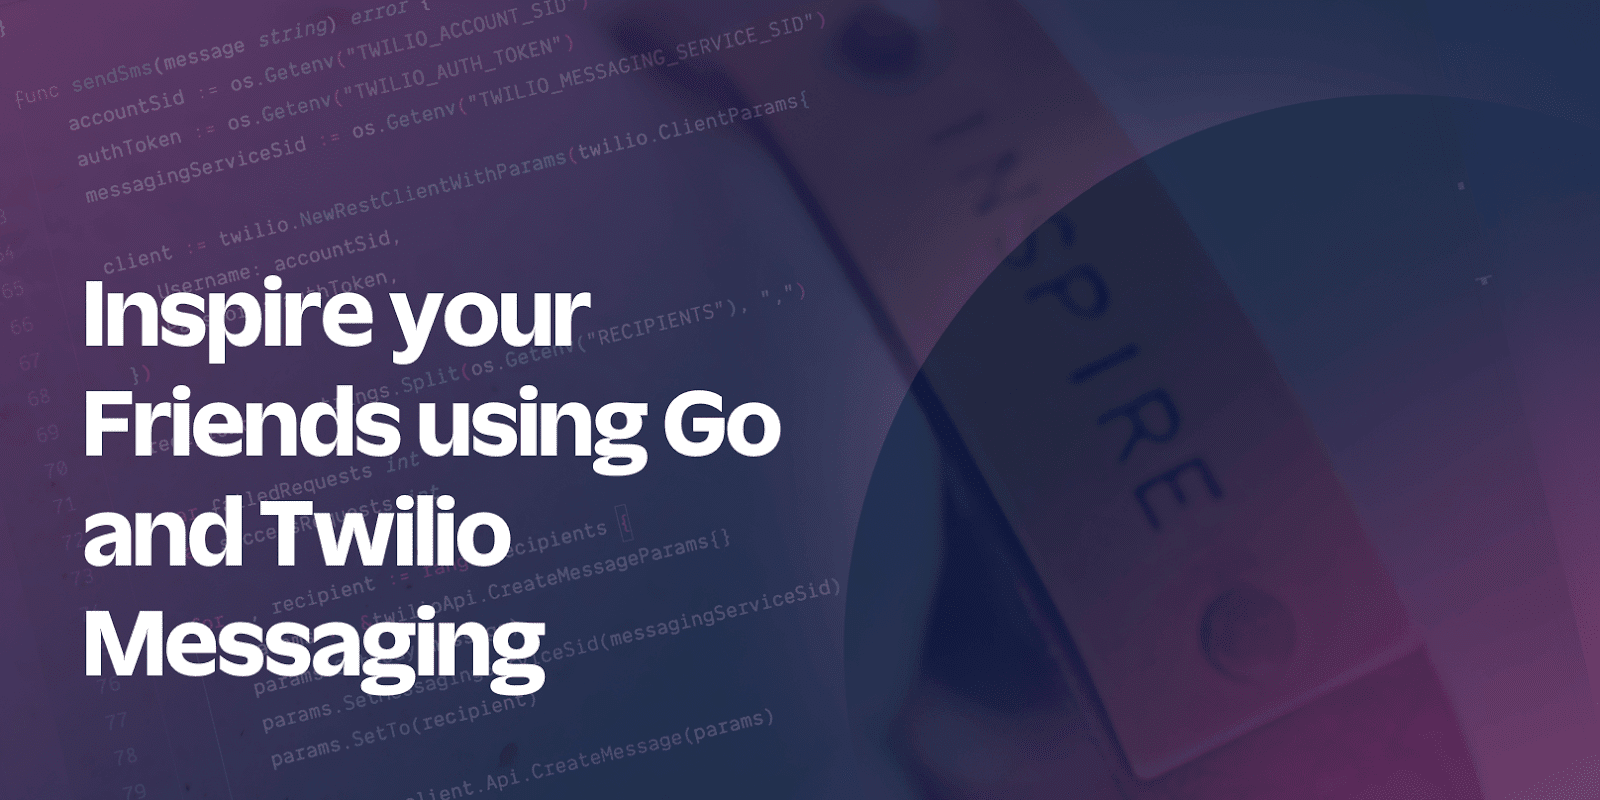 Inspire your Friends using Go and Twilio Messaging